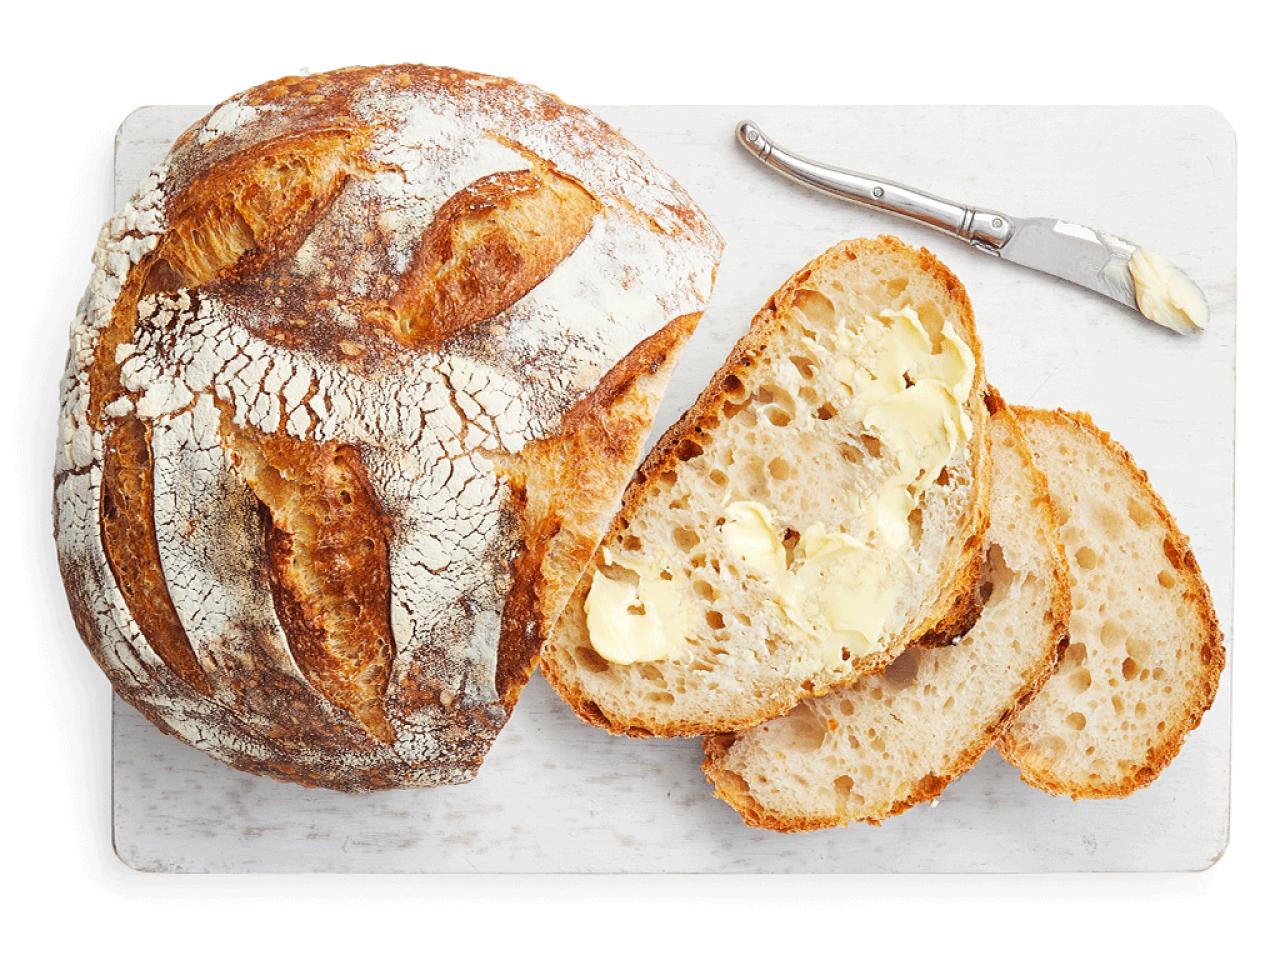 Will Baking With Ice Give You Better Sourdough Bread? - The Pantry